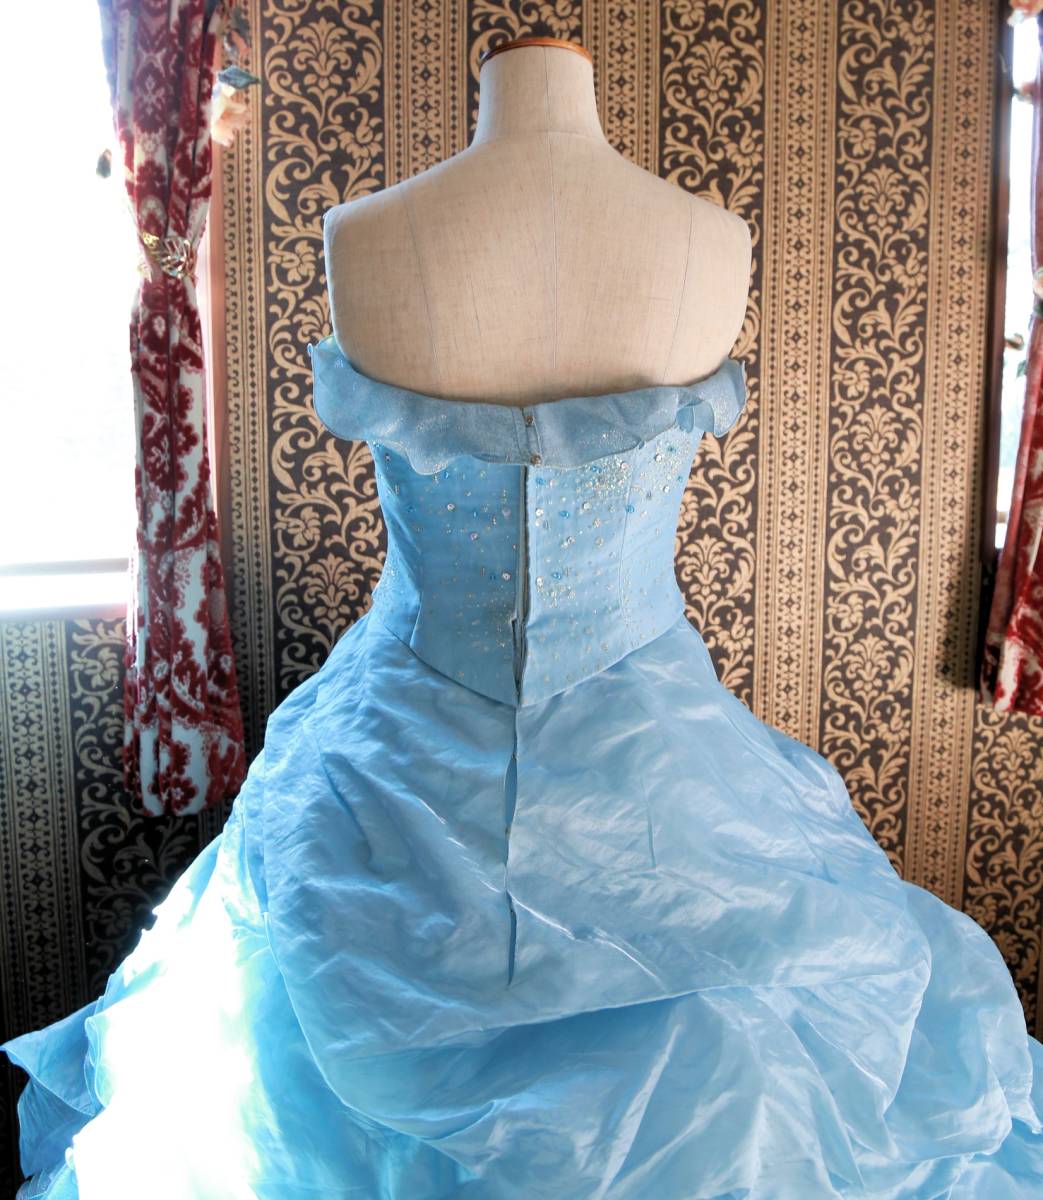 LANCETTY high class wedding dress 7 number 8 number S~M size light blue color dress made in Japan 